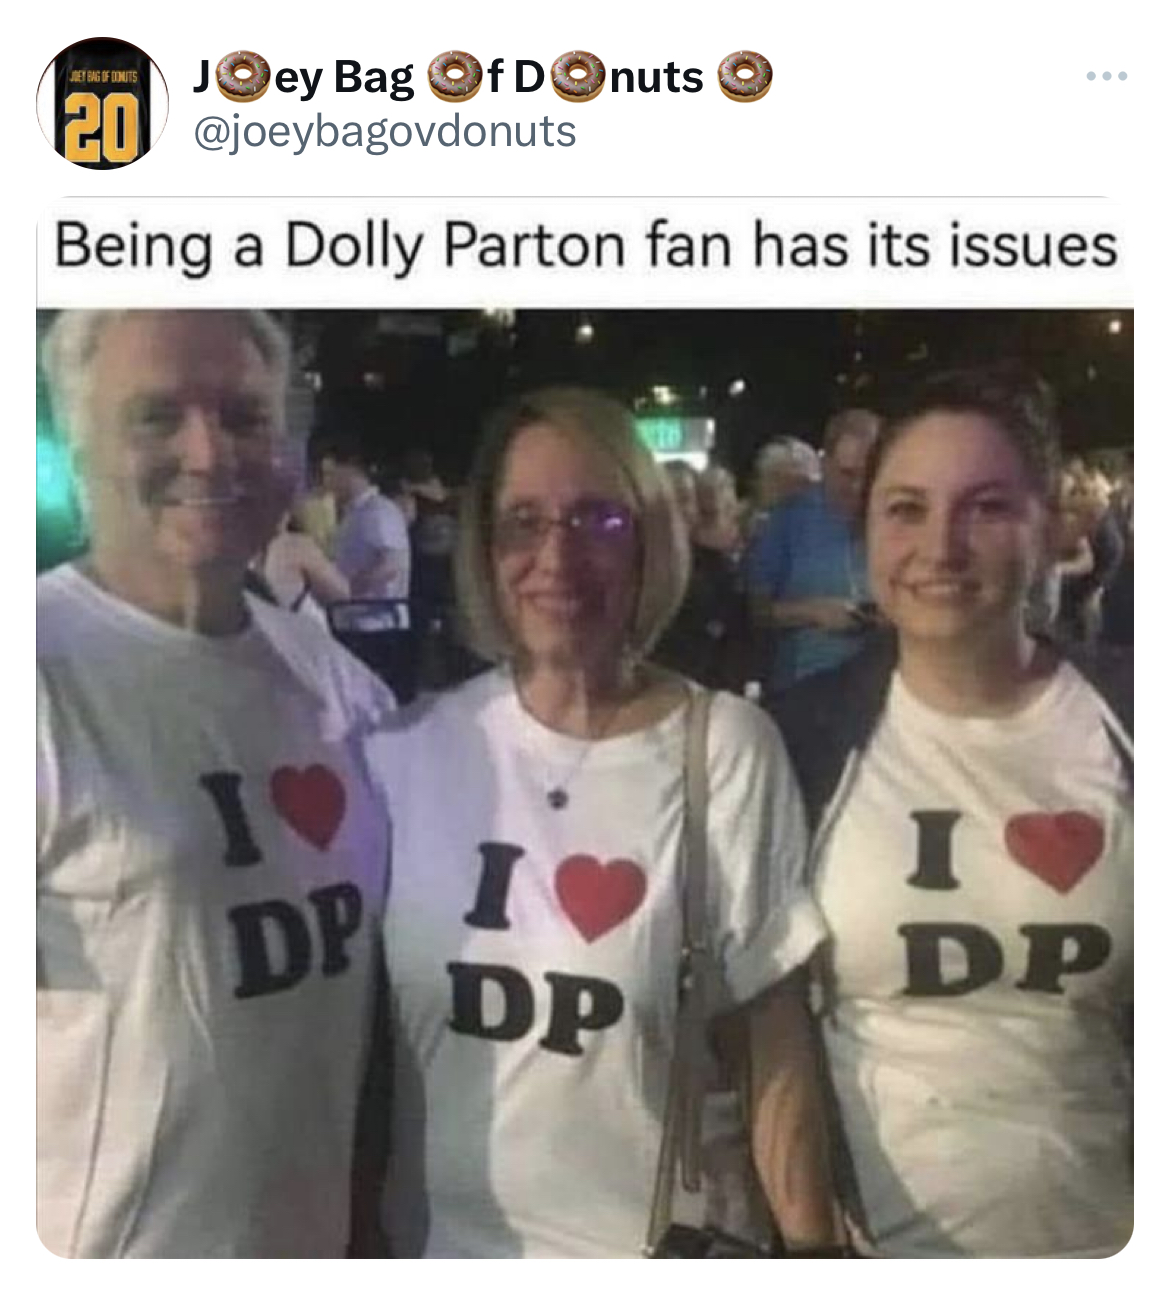 savage and salty tweets - t shirt - Joey Bag Of Donuts 20 Being a Dolly Parton fan has its issues I Dp I Dp I Dp